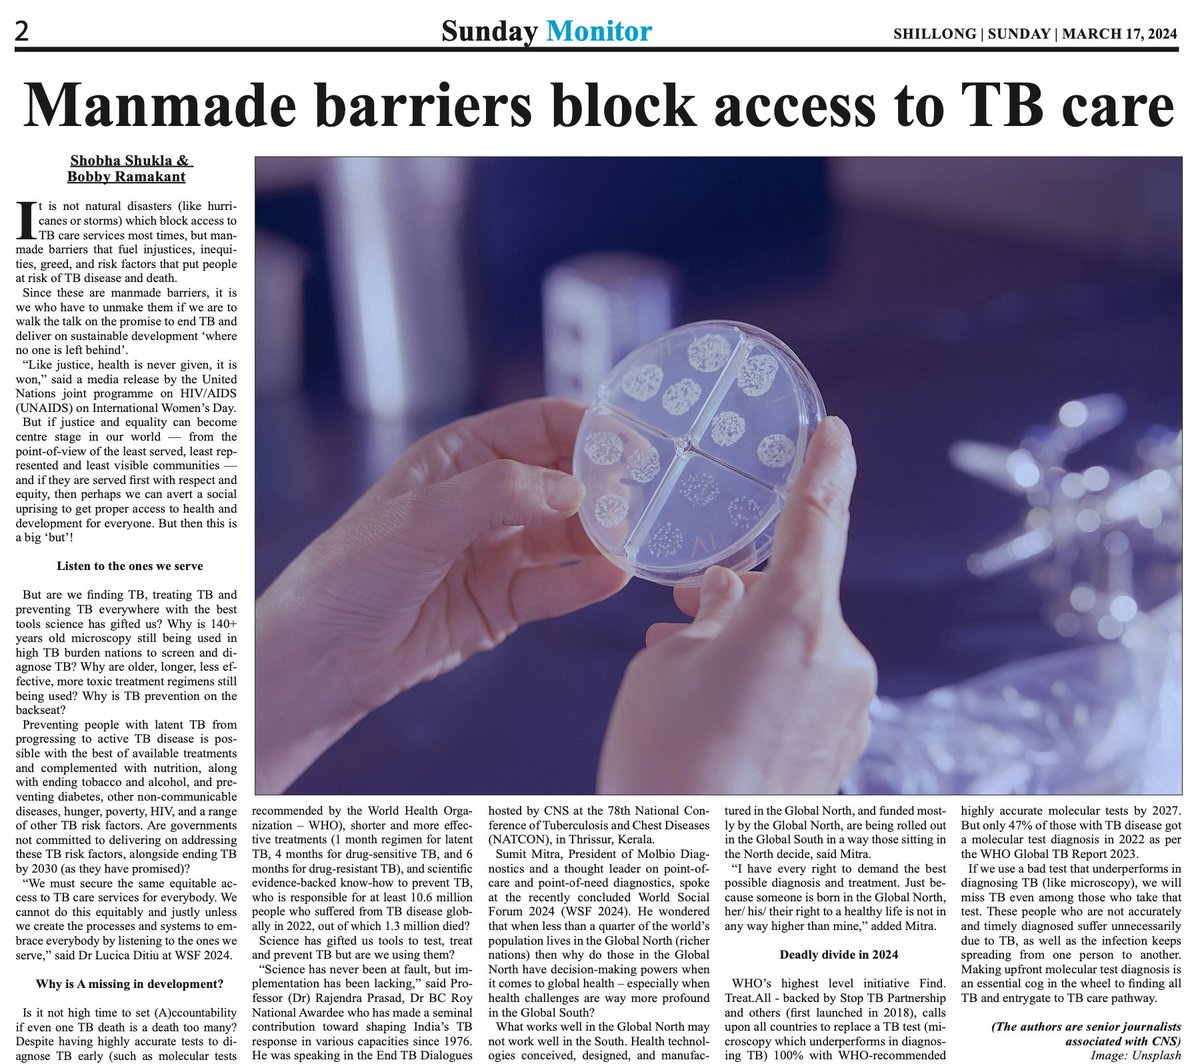 ✅It is not natural disasters (like hurricanes or storms) which block access to TB care services most times, but MANMADE BARRIERS

UNMAKE THEM

✅Meghalaya Monitor
meghalayamonitor.com/sunday-monitor…

✅CNS
citizen-news.org/2024/03/it-is-…

#endTB #ItsTimeForAChange #YesWeCanEndTB #findallTB #WHD2024